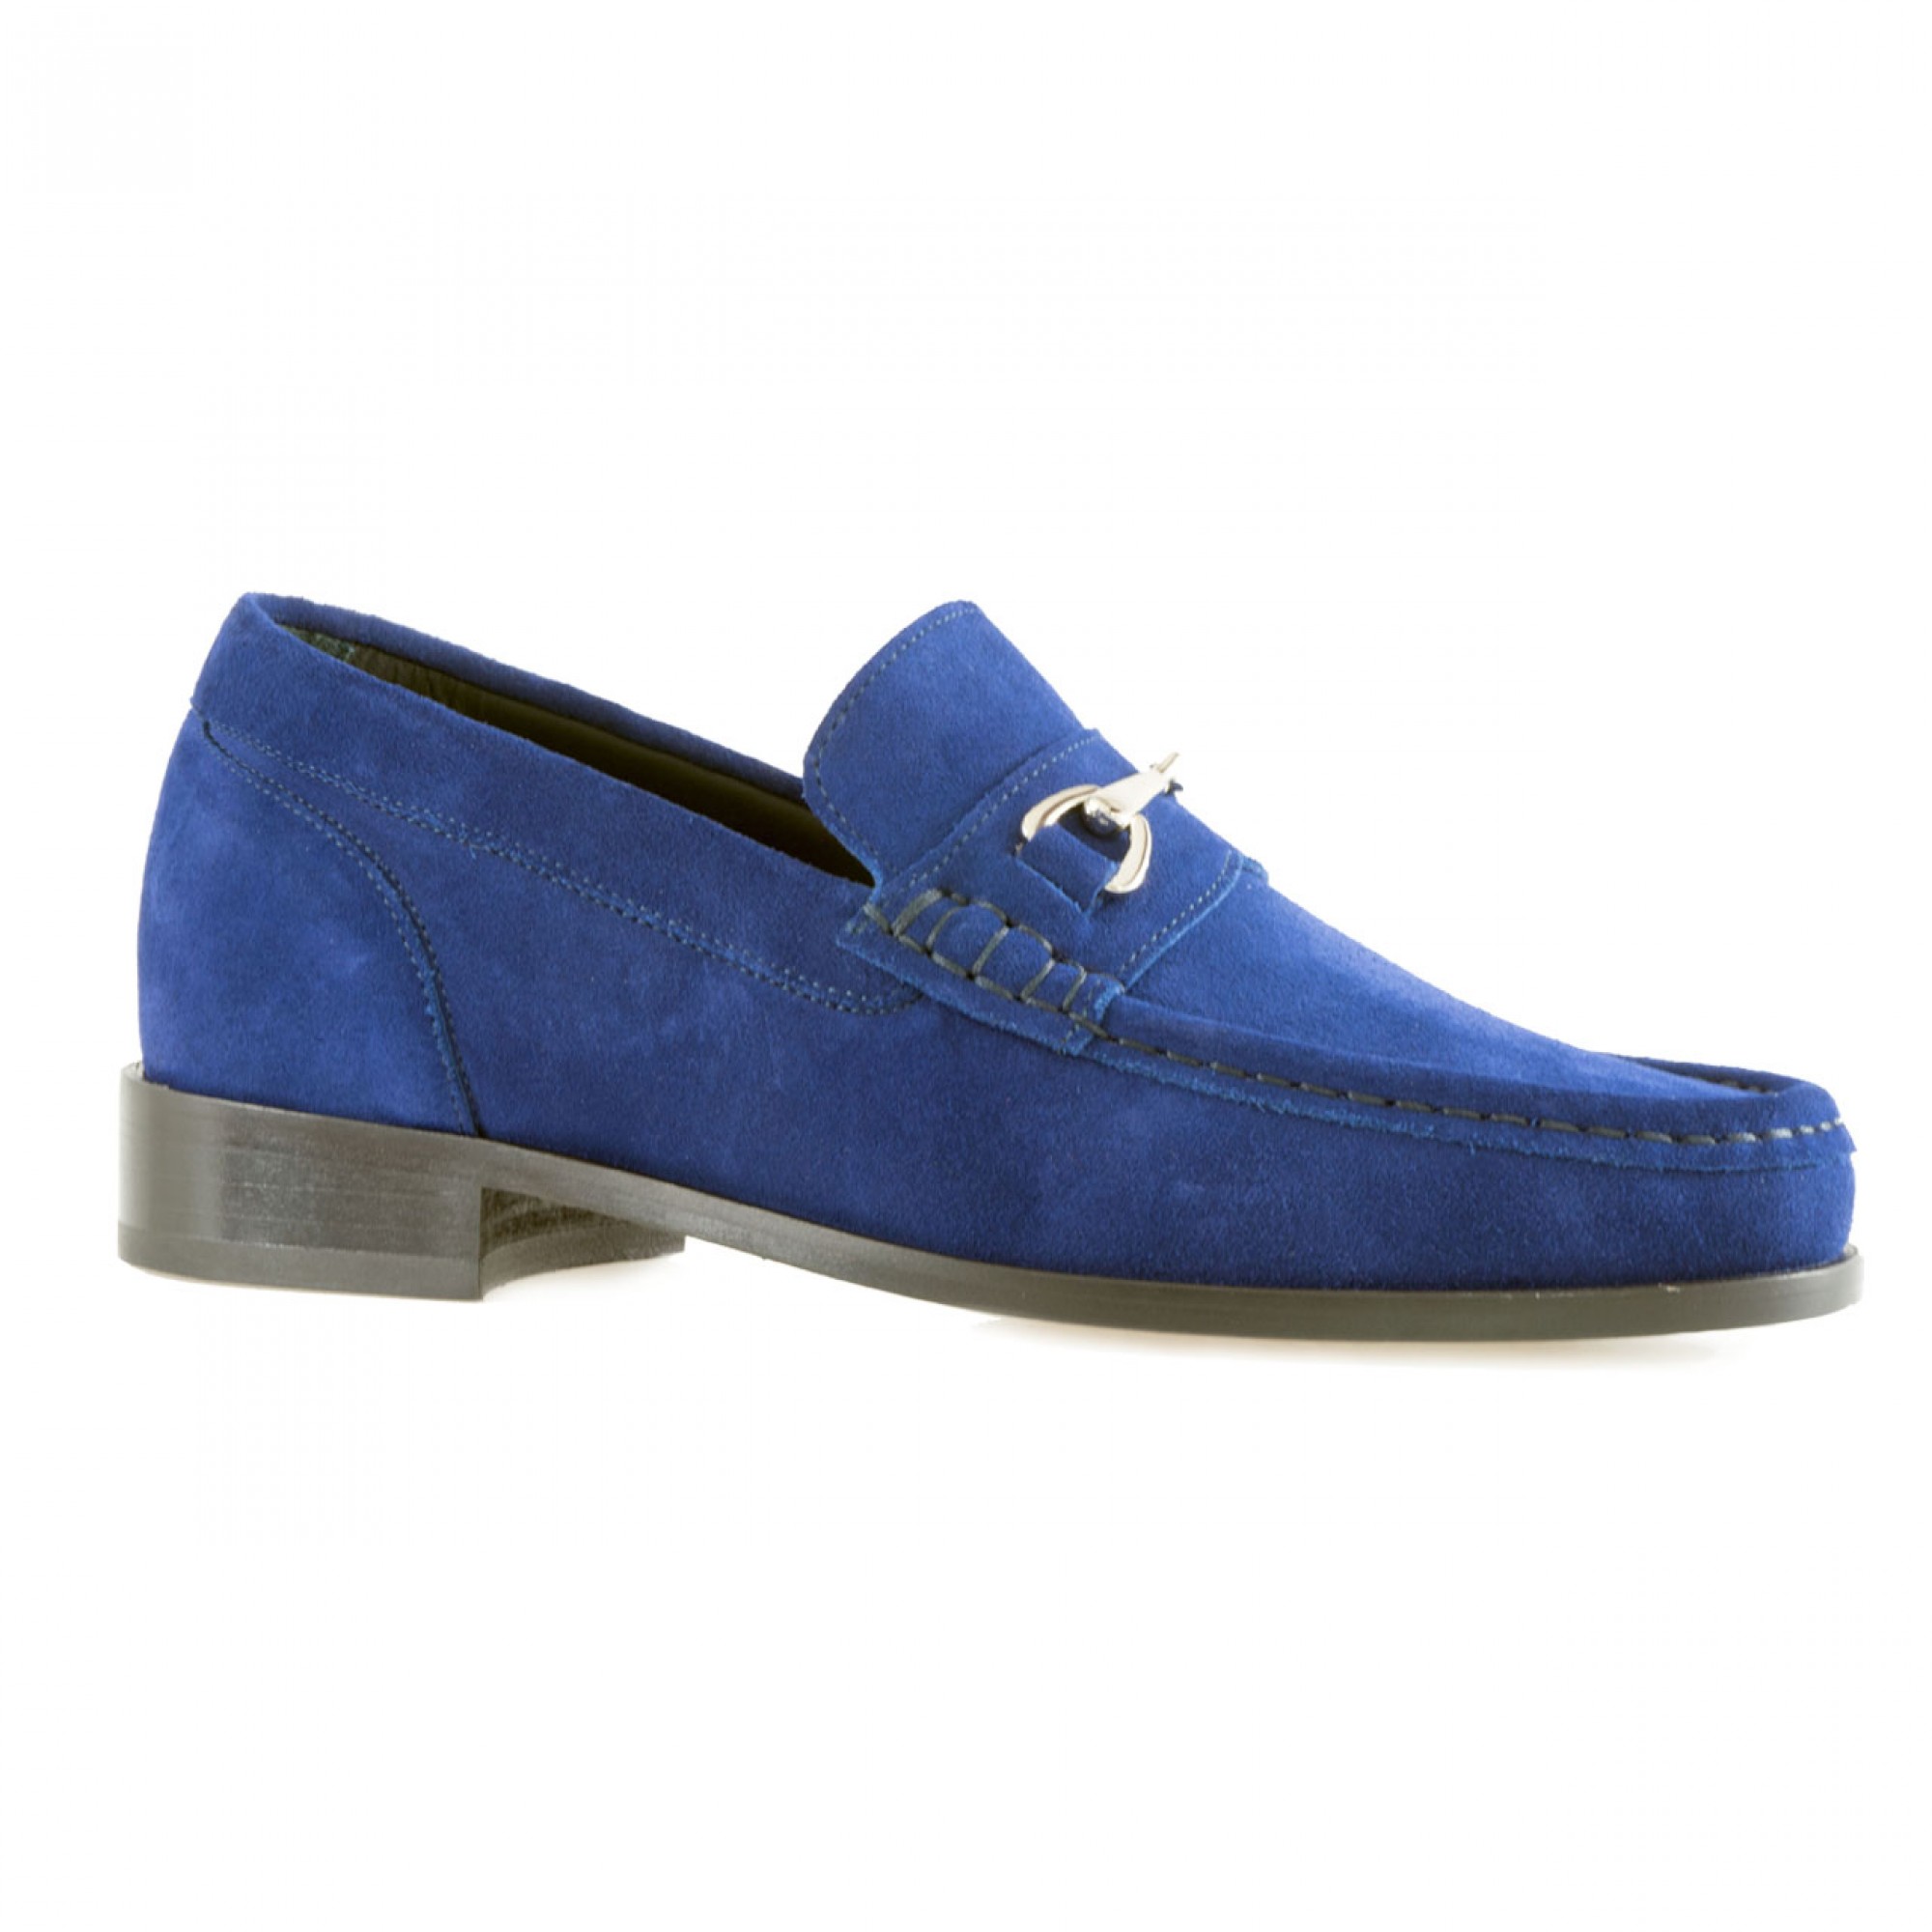 Reims - Elevator Loafers in Suede Leather up to 2.6 inches